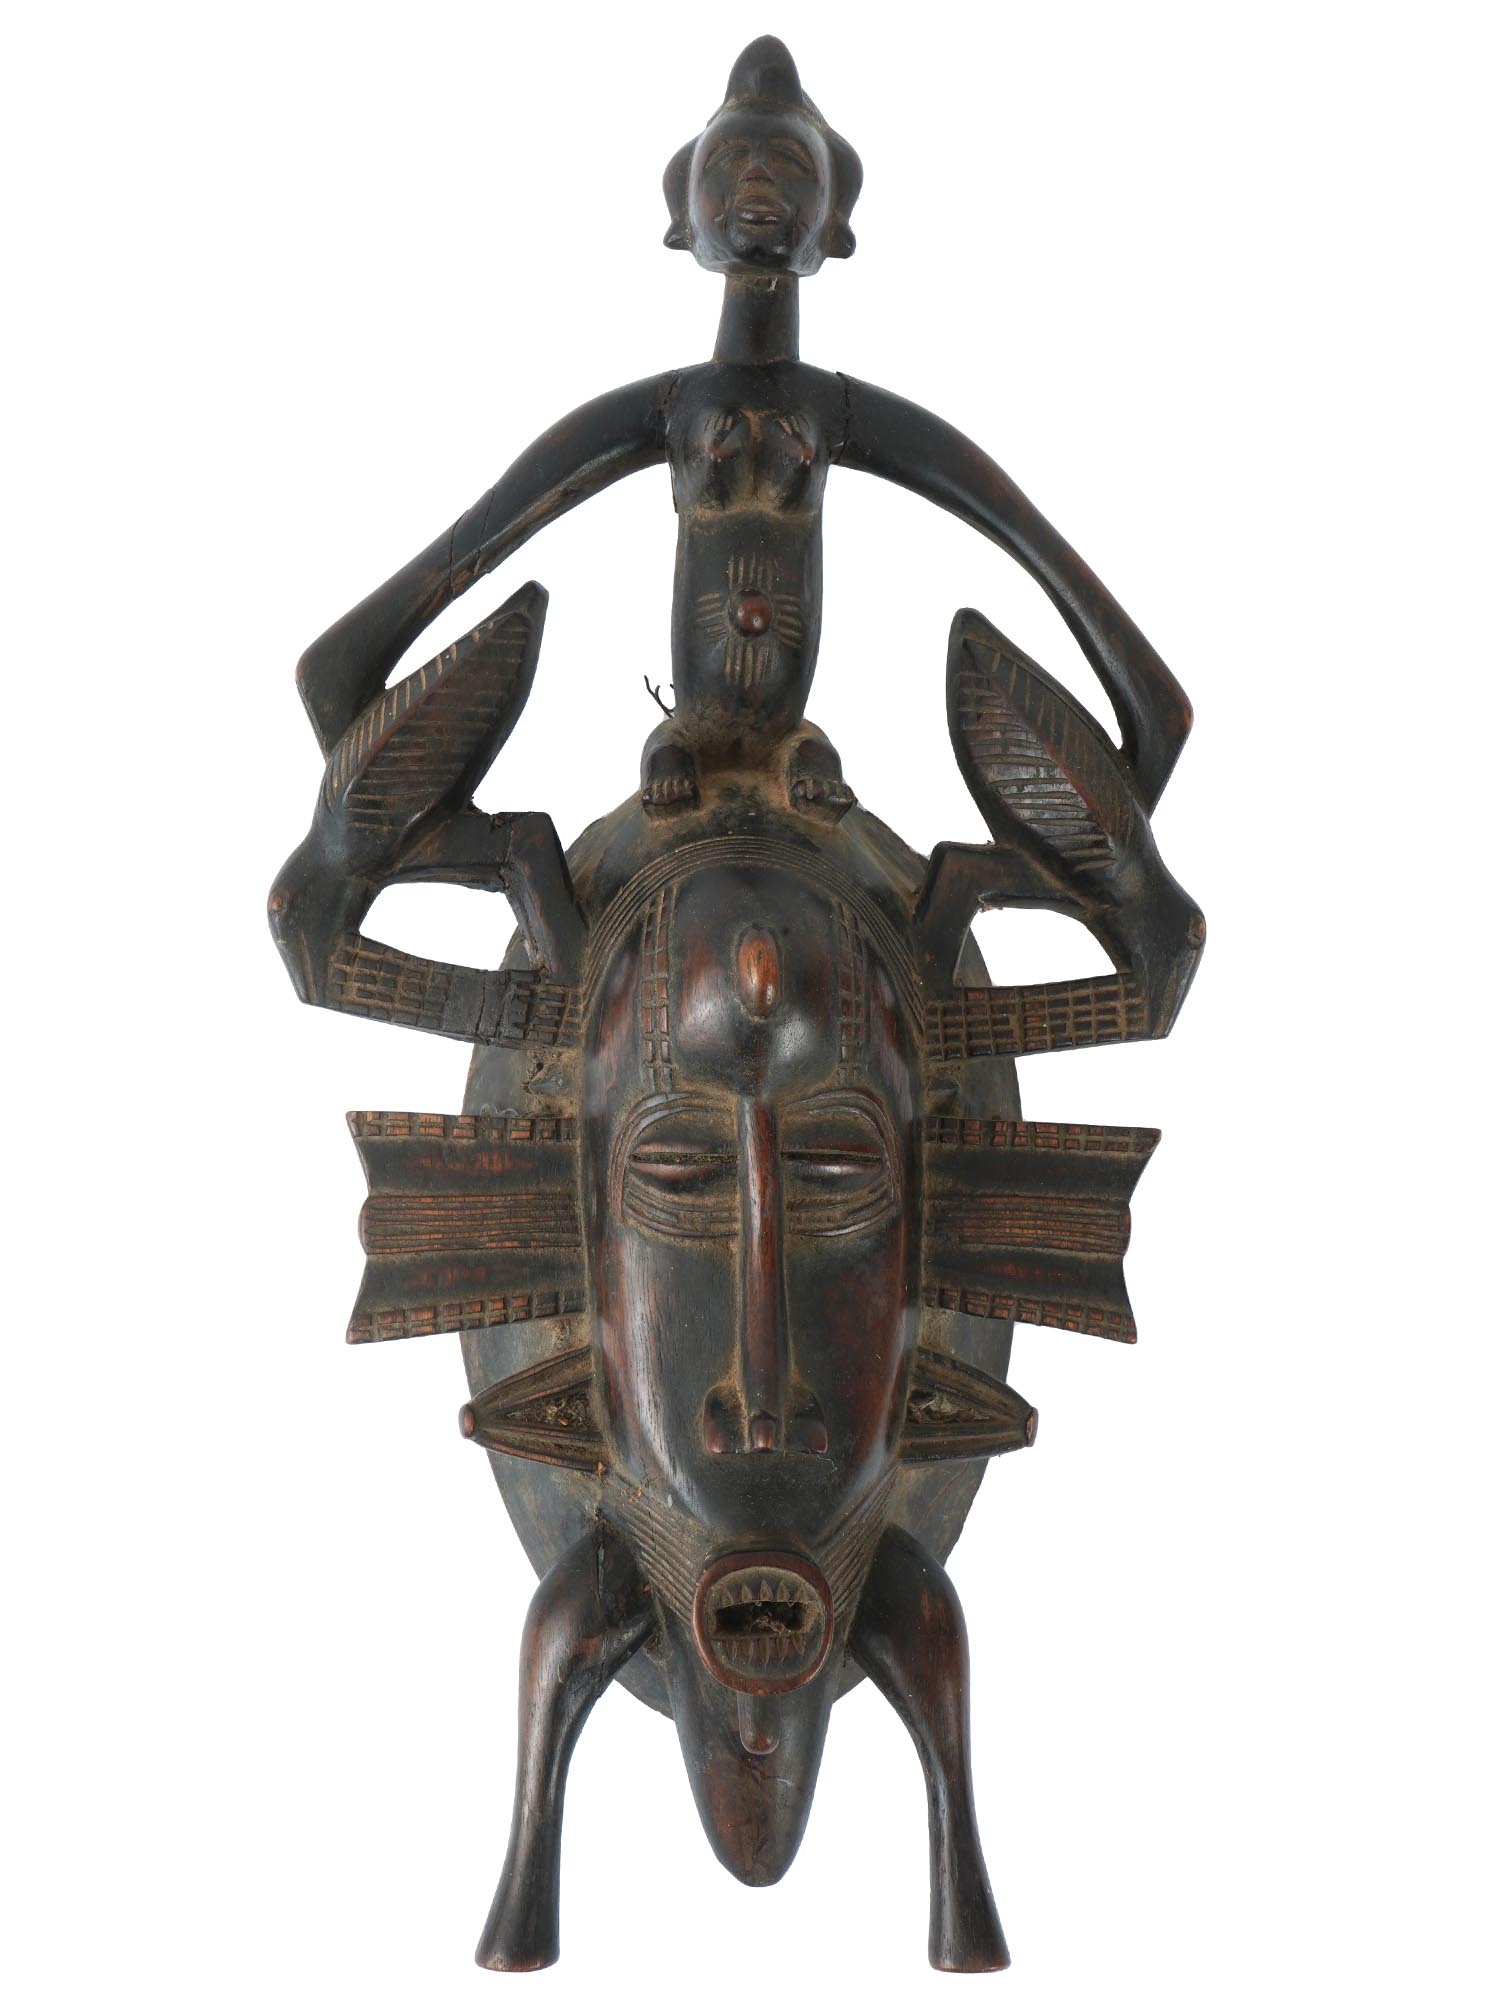 WEST AFRICAN IVORY COAST SENUFO PEOPLE KPELIE MASK PIC-0